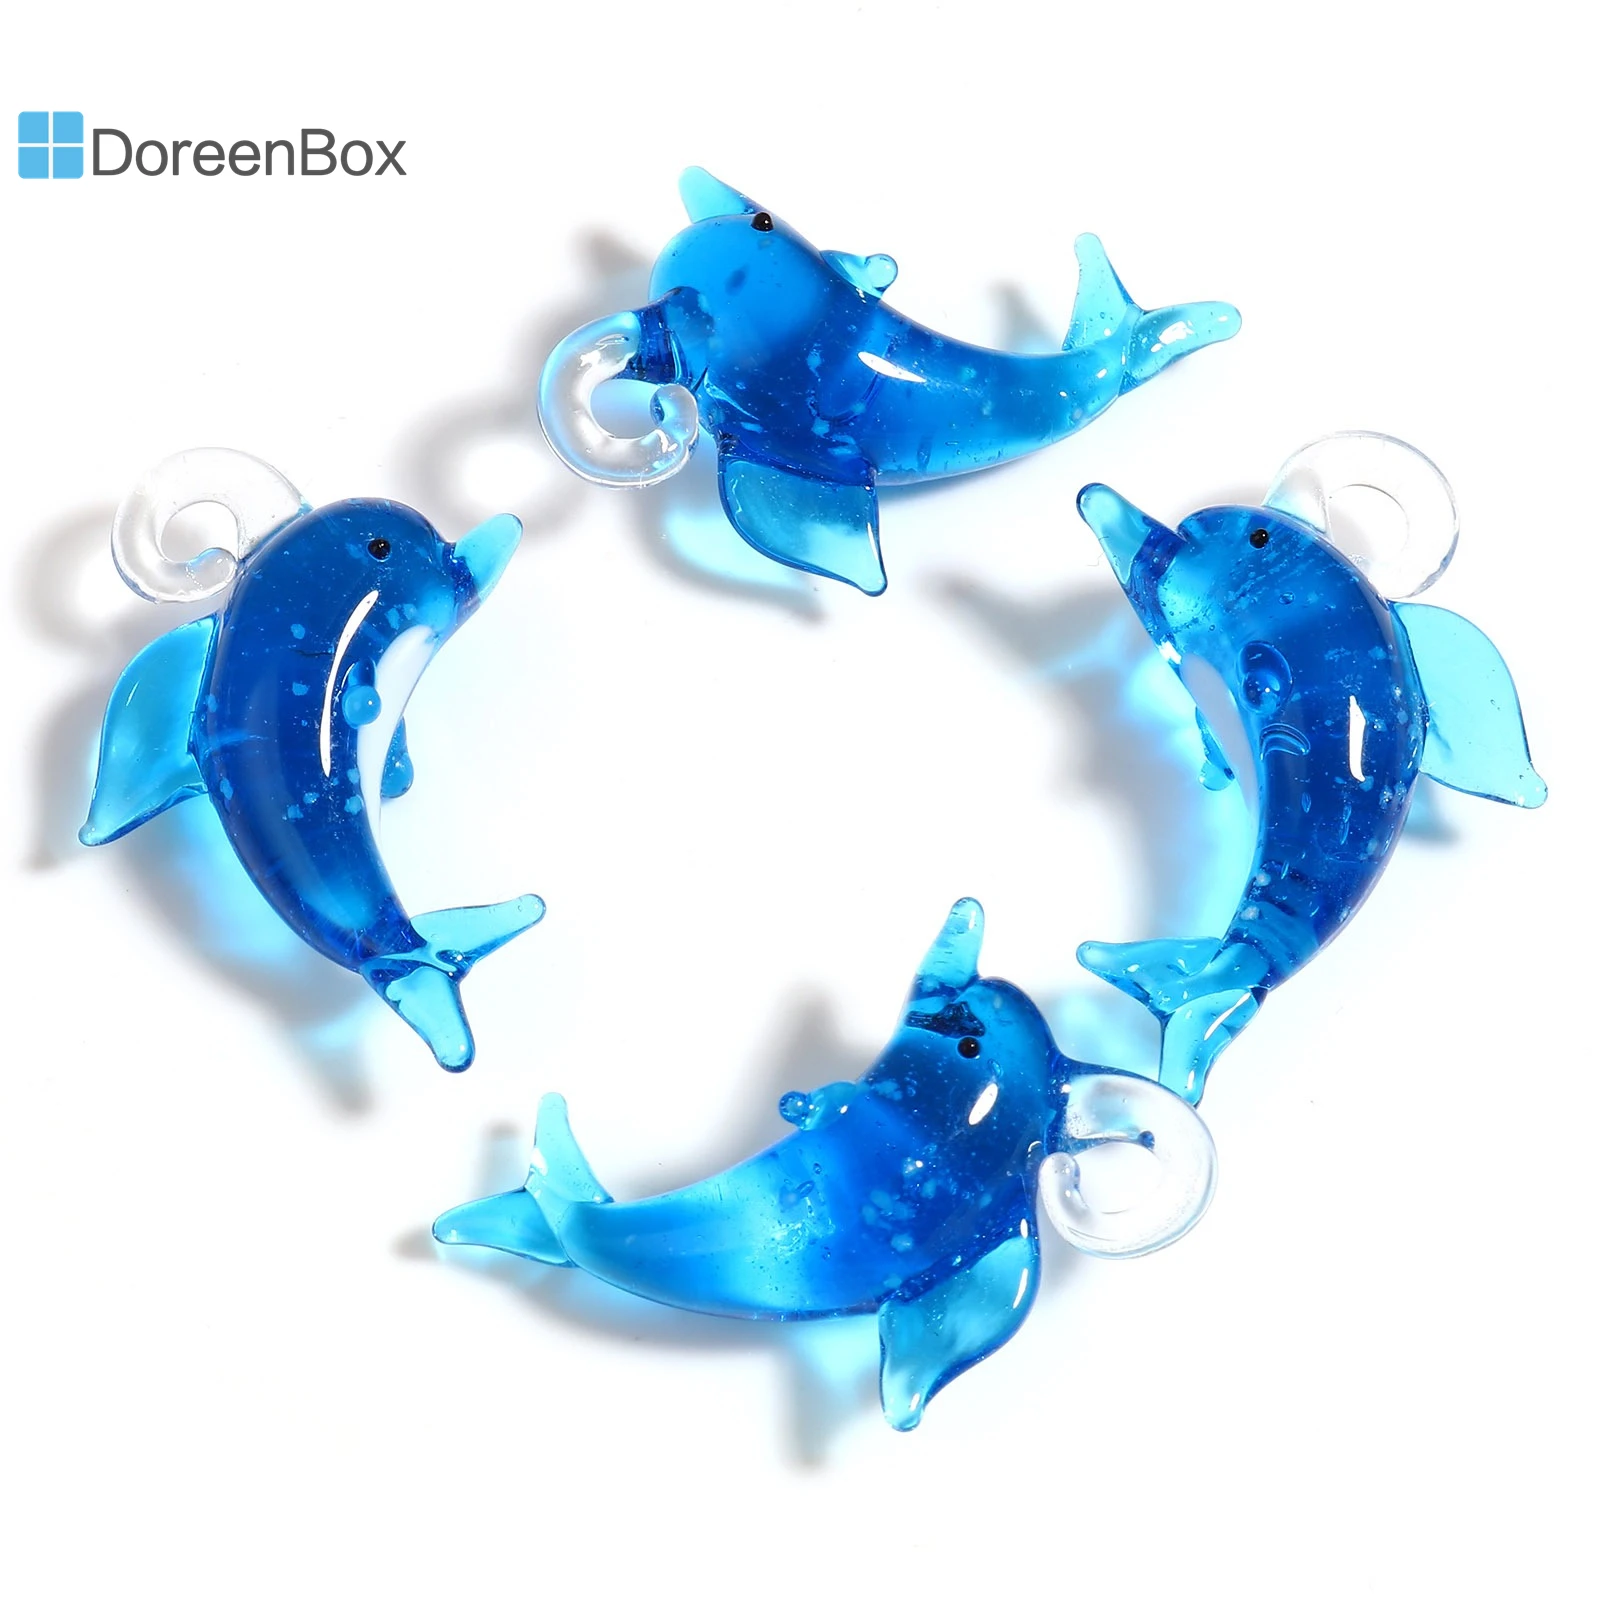 

2PCs Dolphin Lampwork Glass Ocean Jewelry Beads Animal Blue Loose Beads For DIY Making Bracelets Jewelry About 4mm x 2.8mm